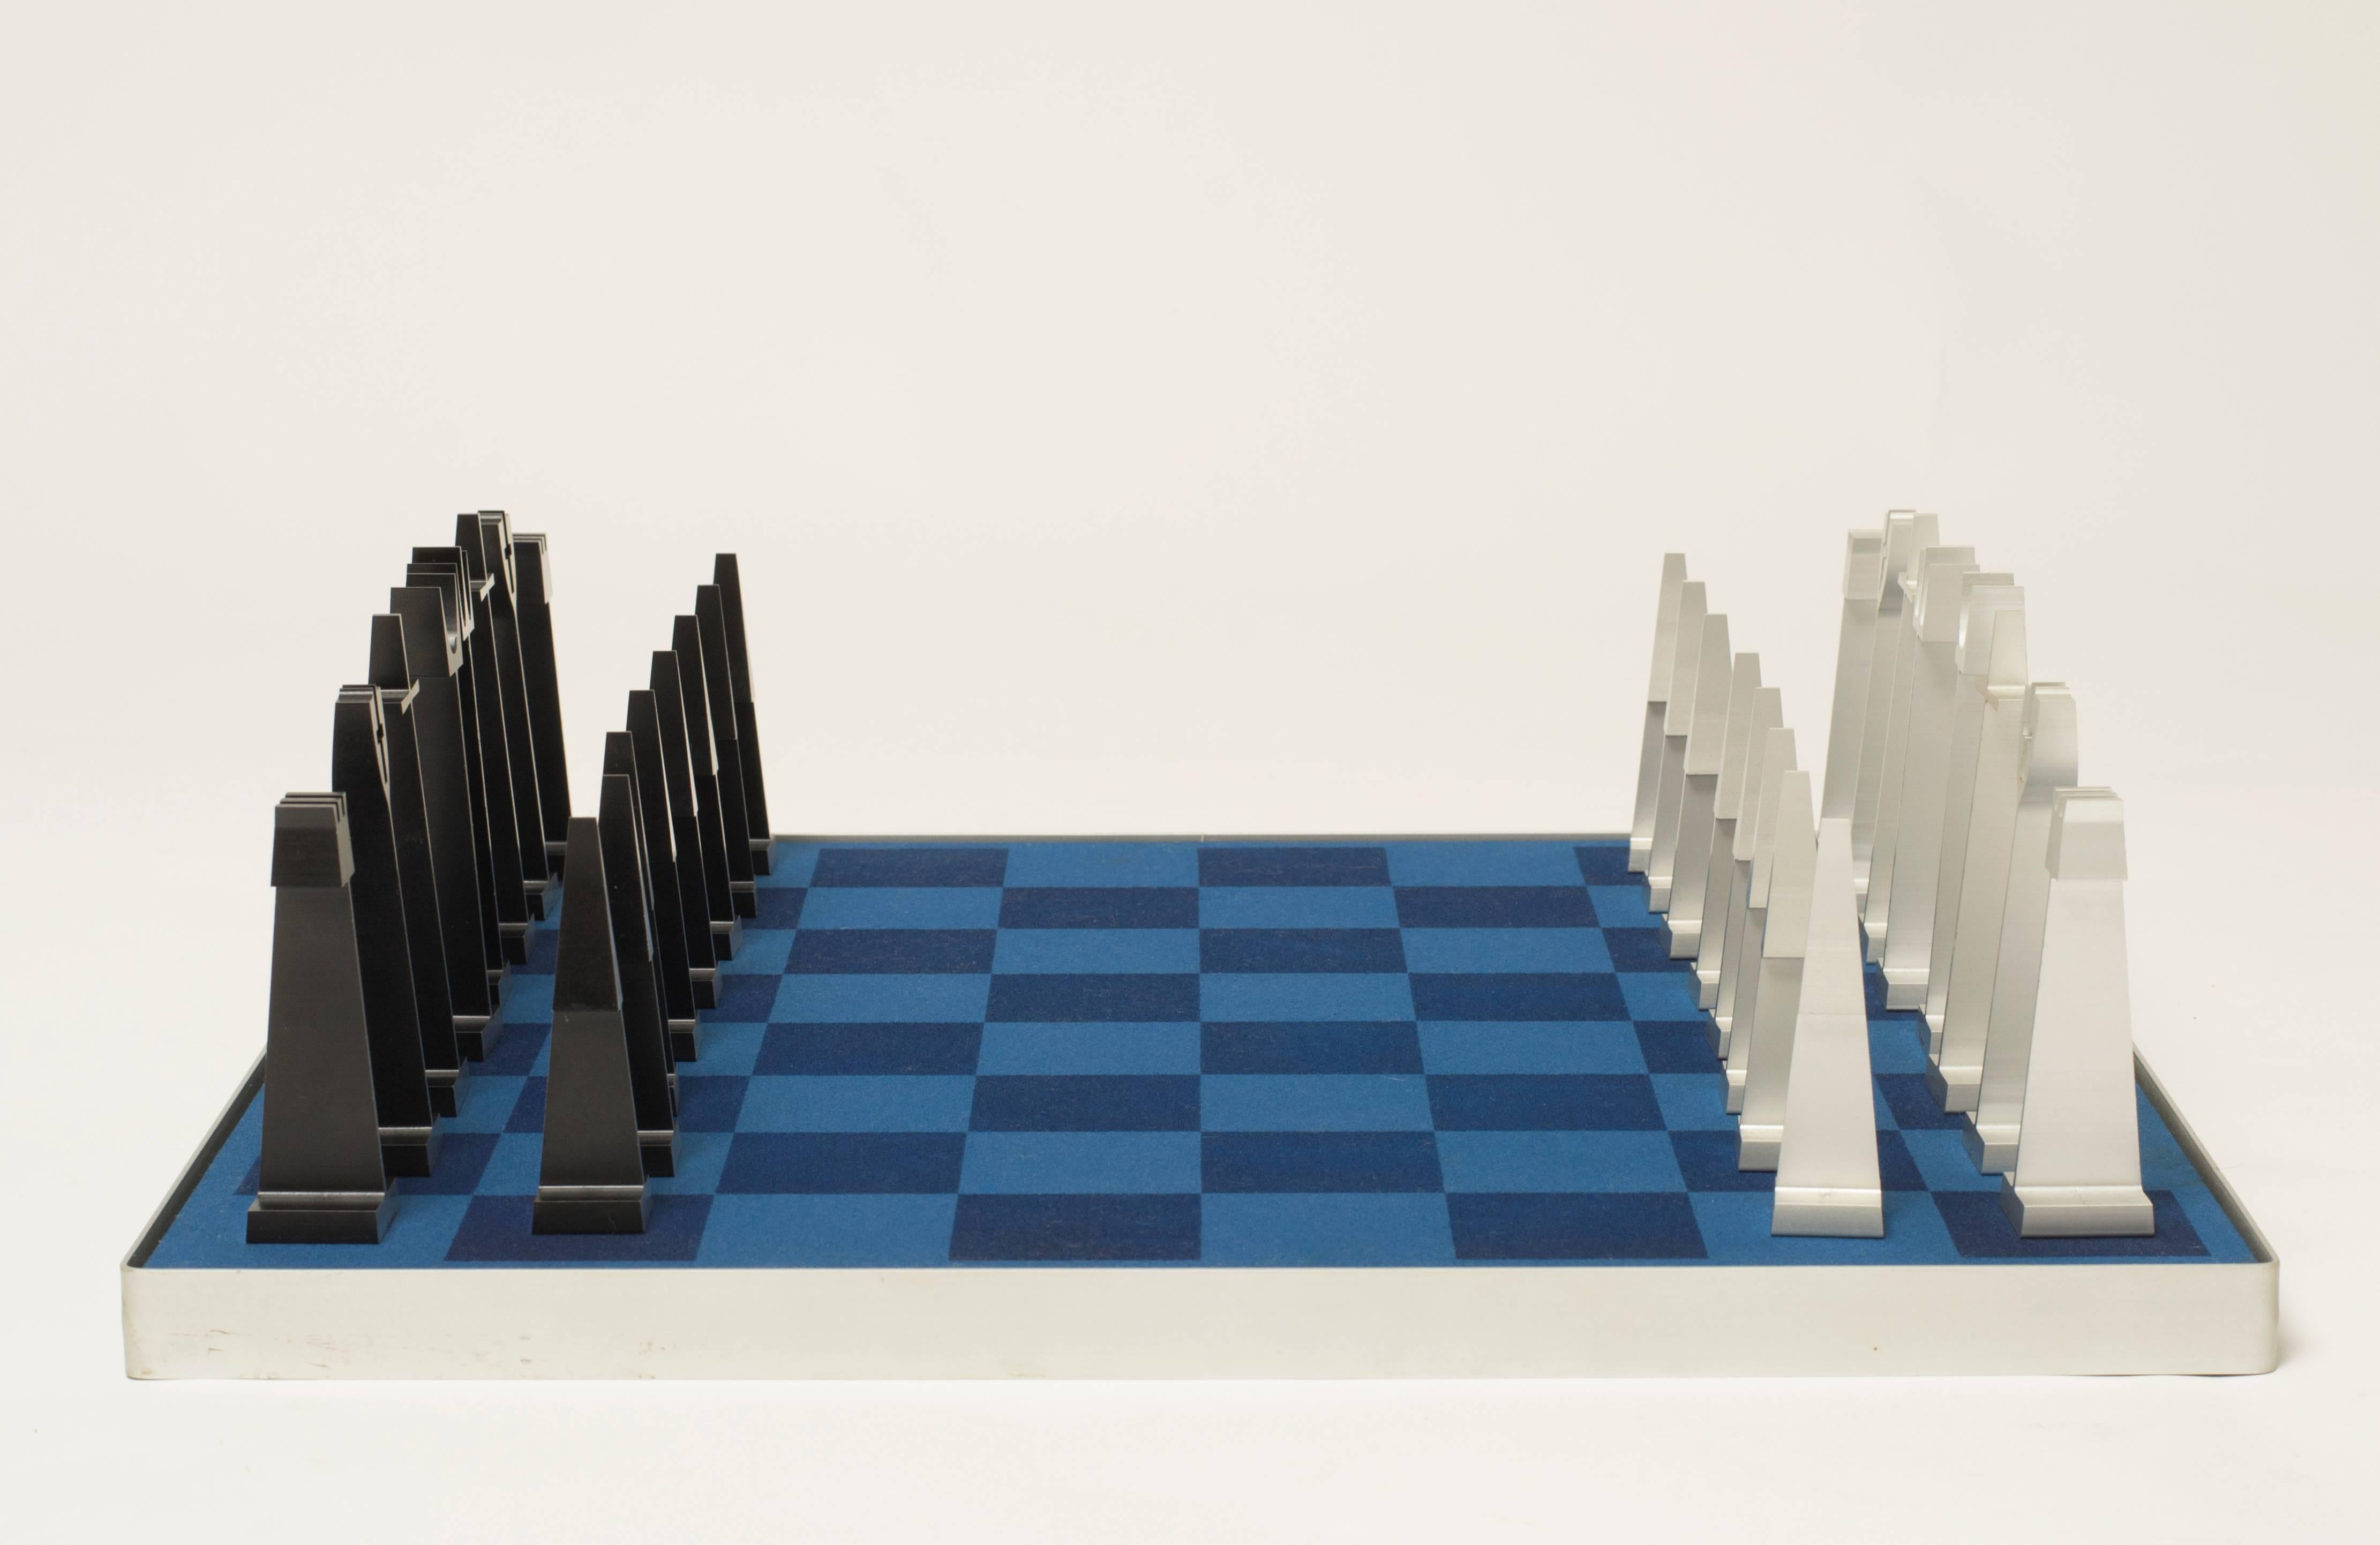 Mid-20th Century Mid-Century Modern Chess Set by Austin Cox for ALCOA, 1962